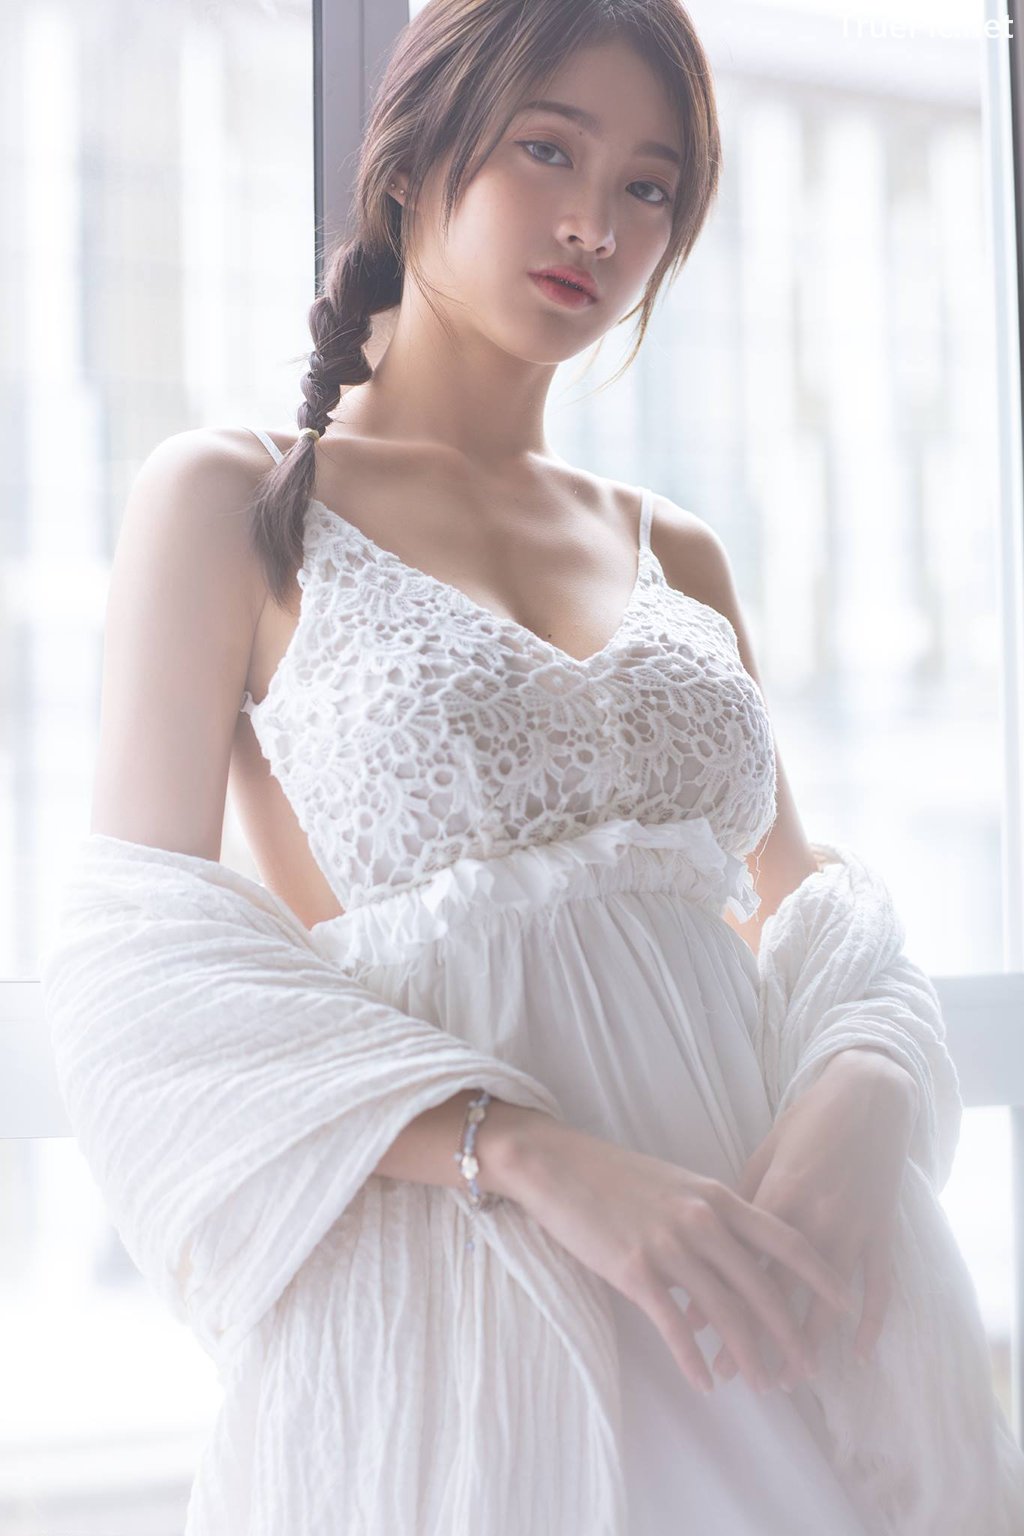 Image Thailand Model - Pimploy Chitranapawong - Beautiful In White - TruePic.net - Picture-26